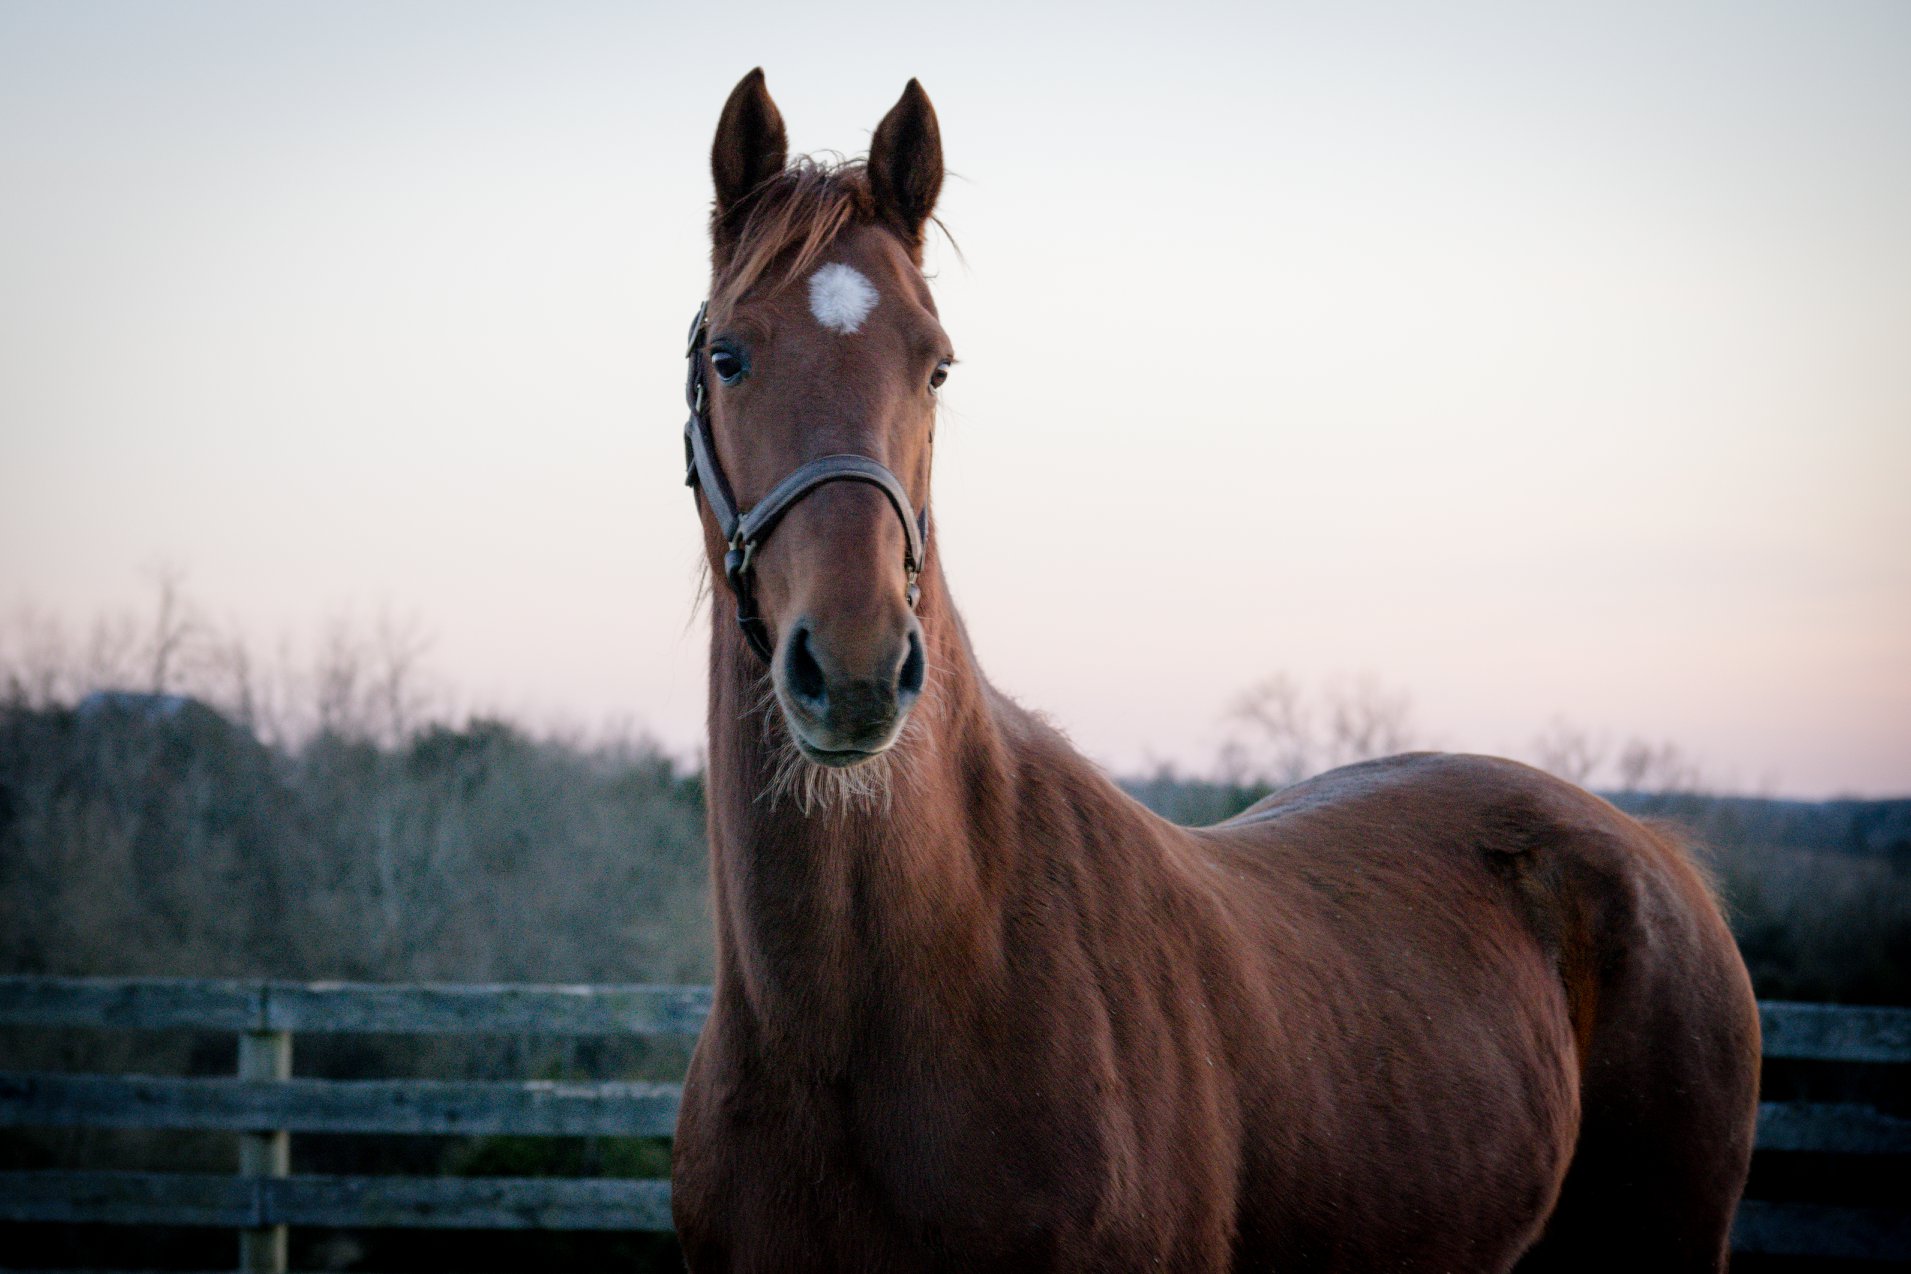 Bebe, an adoptable Saddlebred mare located in Kentucky